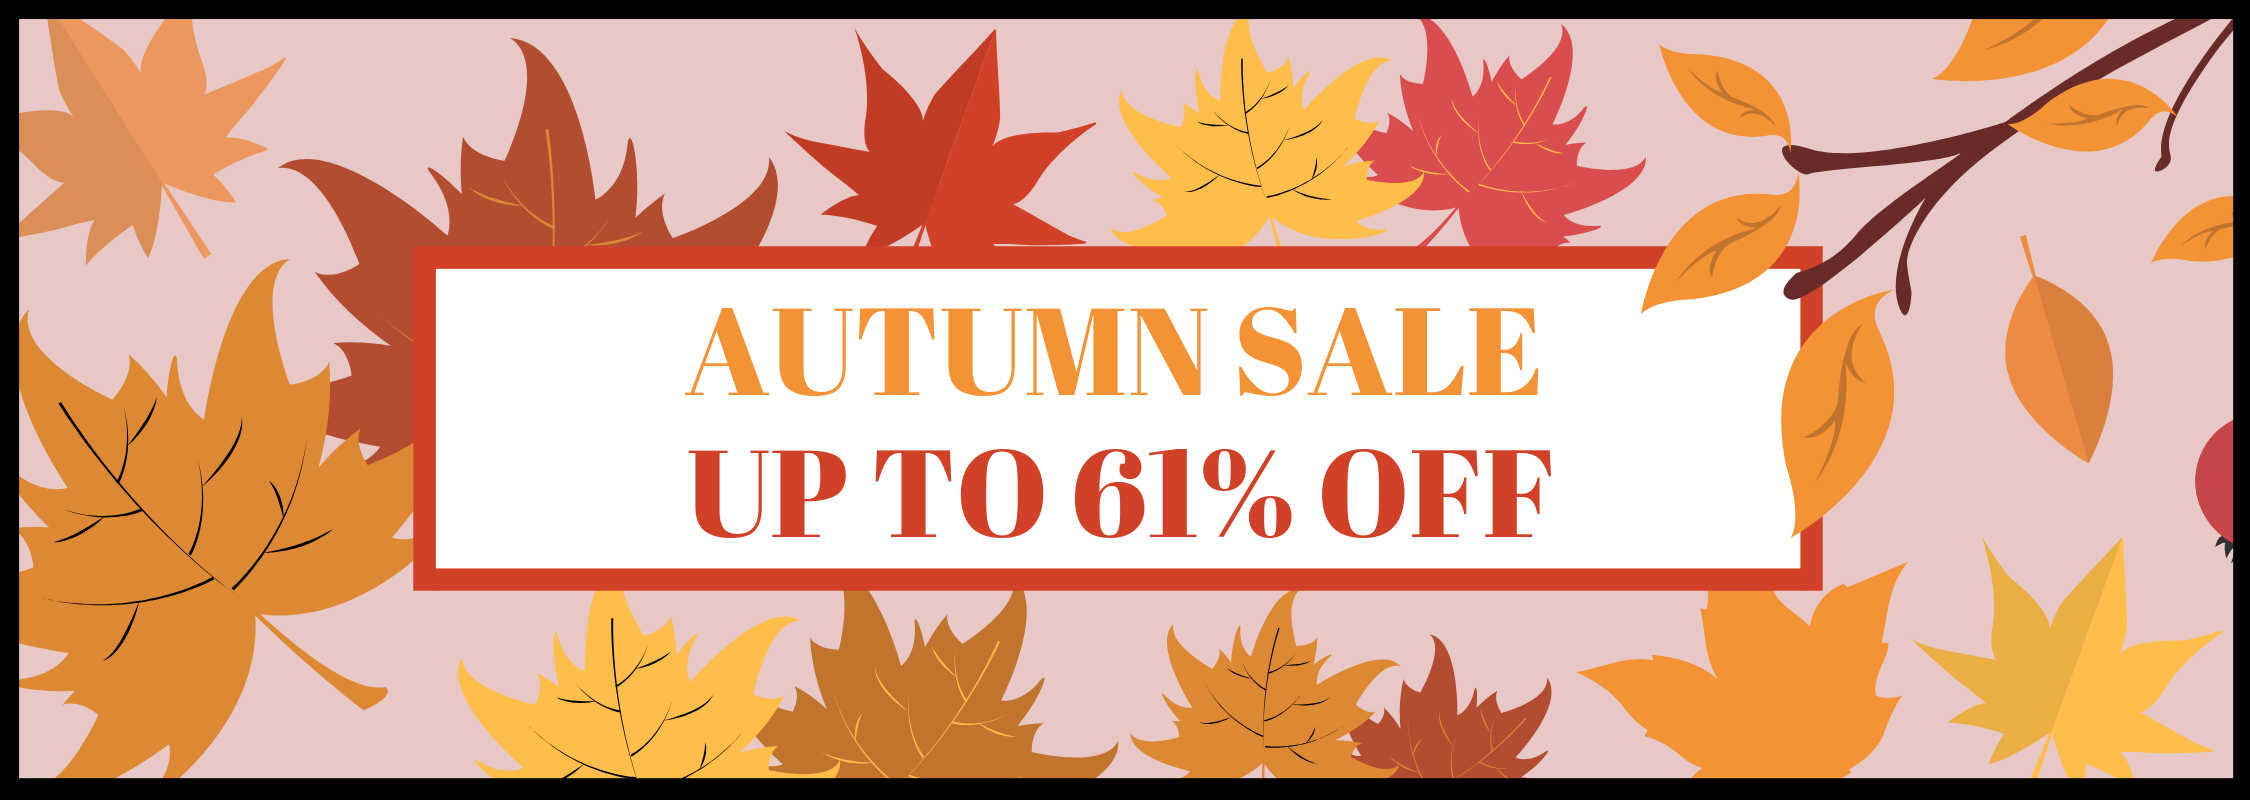 From The Box Office | Autumn Sale